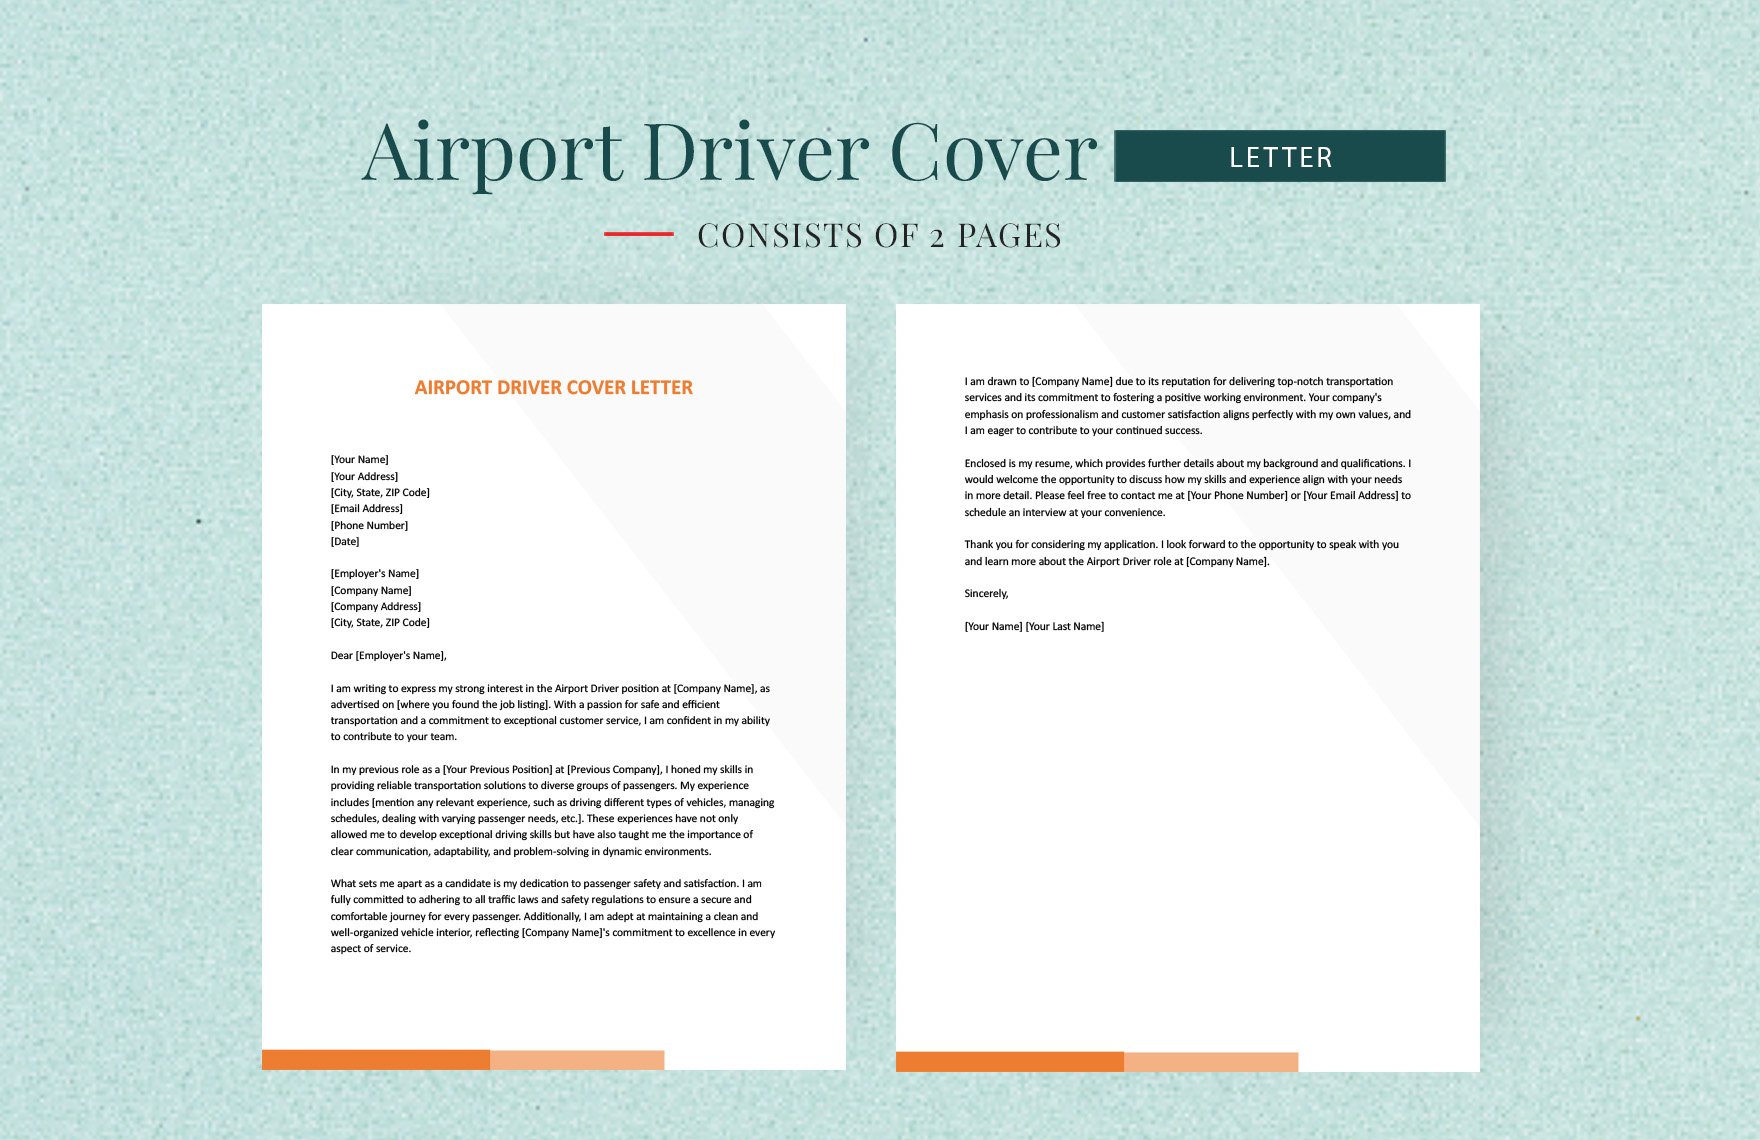 Airport Driver Cover Letter